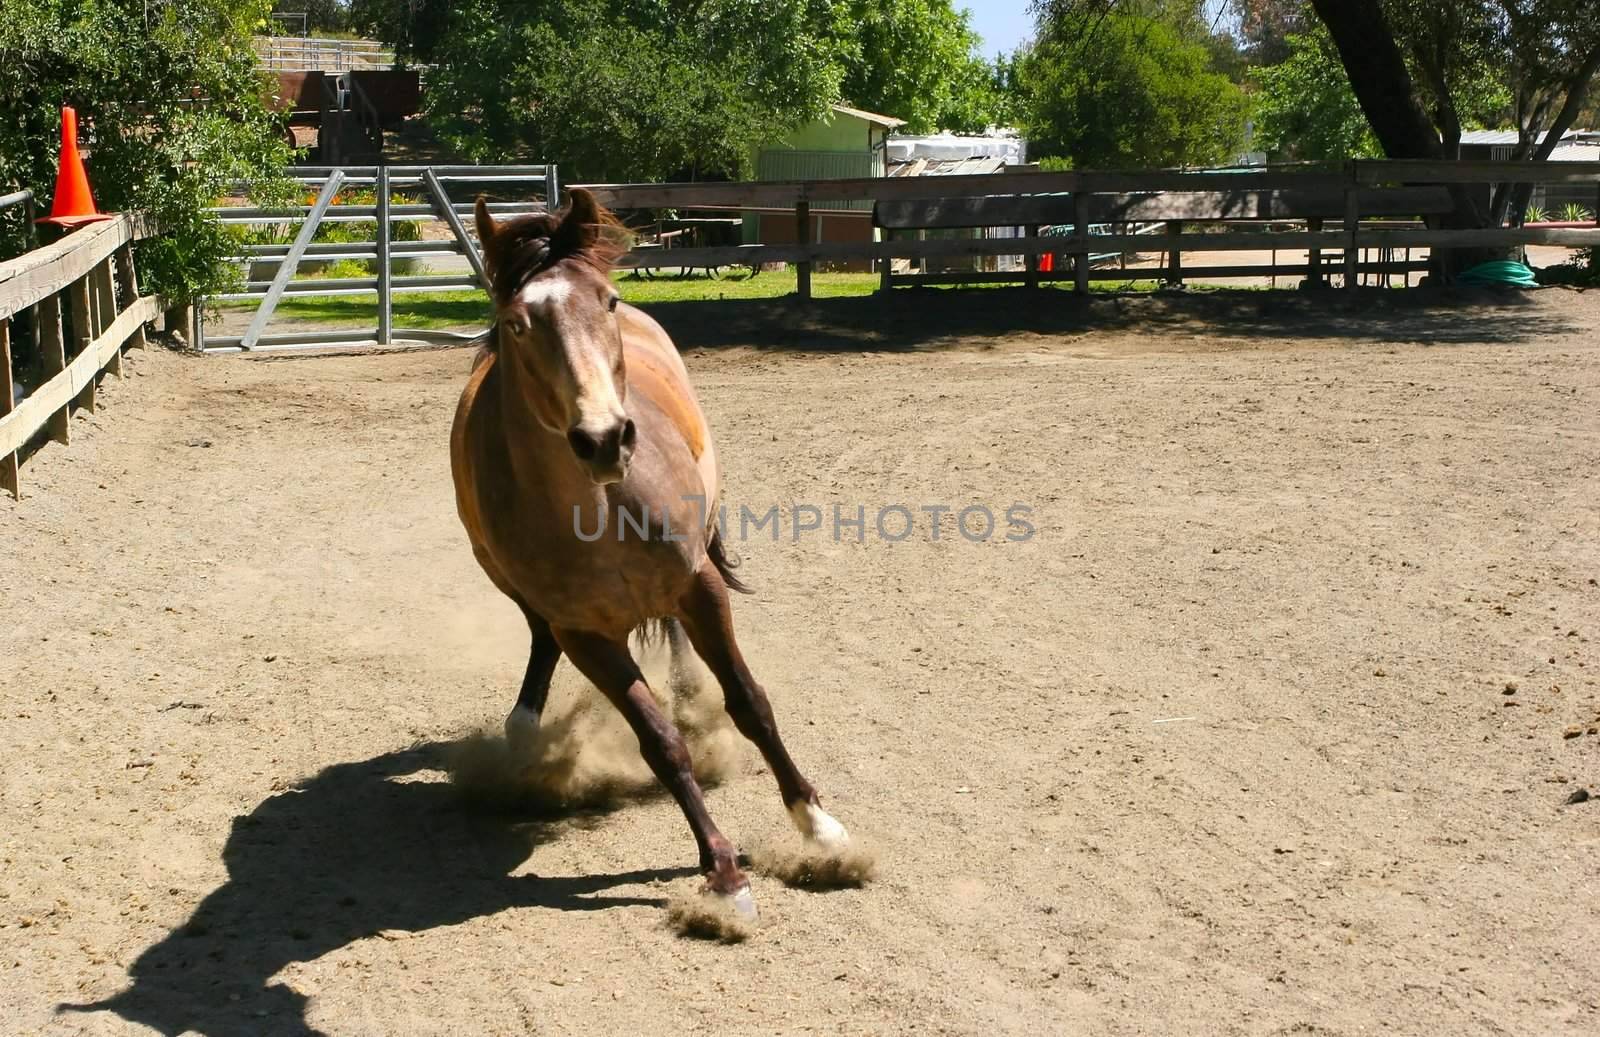 Scenic Horseback Riding just 20 minutes from downtown San Jose in the Saratoga foothills.. Come enjoy a guided horseback ride through Cooper-Garrod Vineyards and the Fremont-Older Mid-Peninsula Open Space Preserve on the eastern slopes of the Santa Cruz Mountains